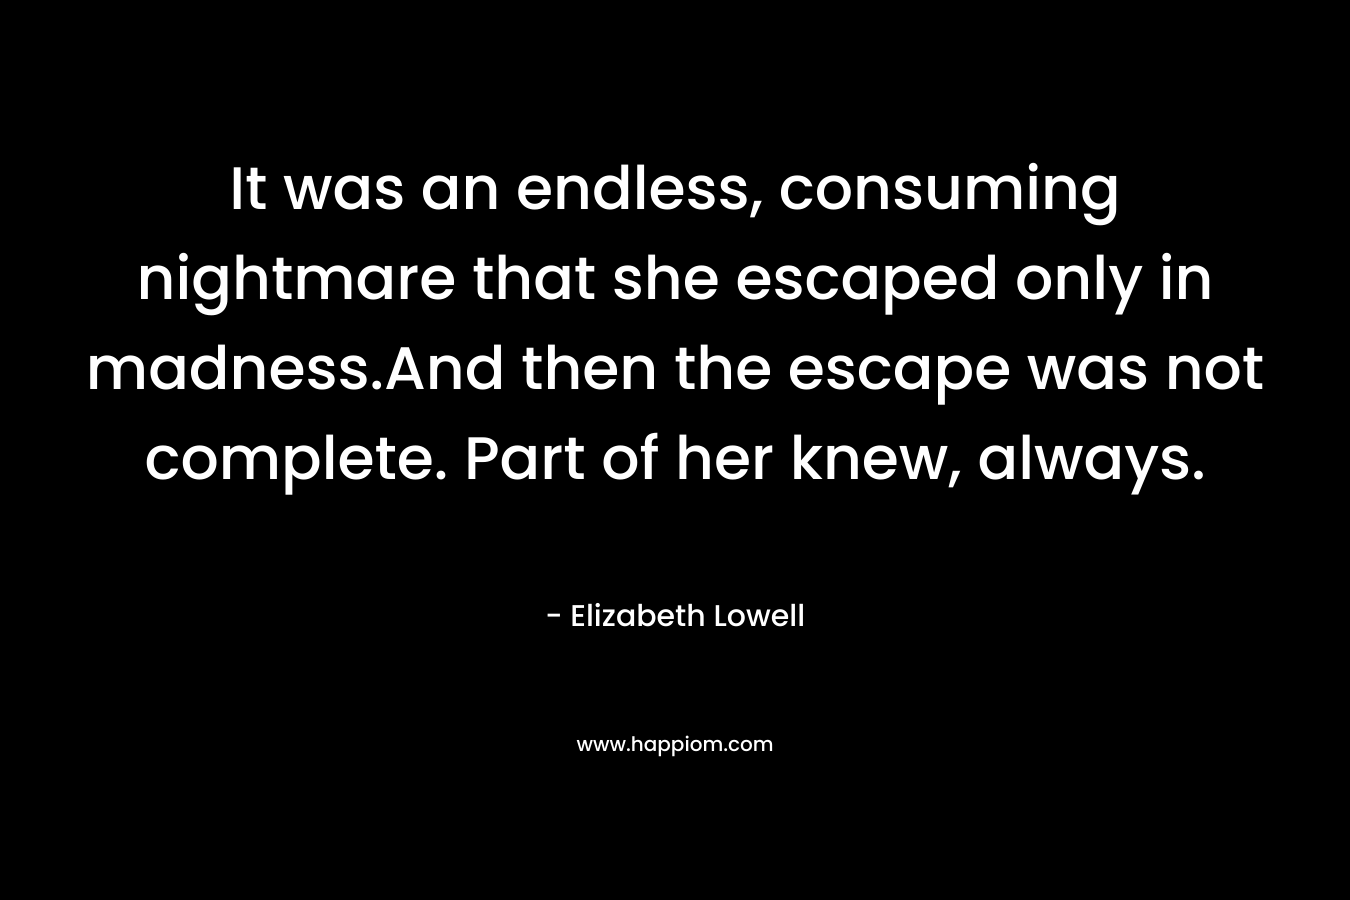 It was an endless, consuming nightmare that she escaped only in madness.And then the escape was not complete. Part of her knew, always. – Elizabeth Lowell